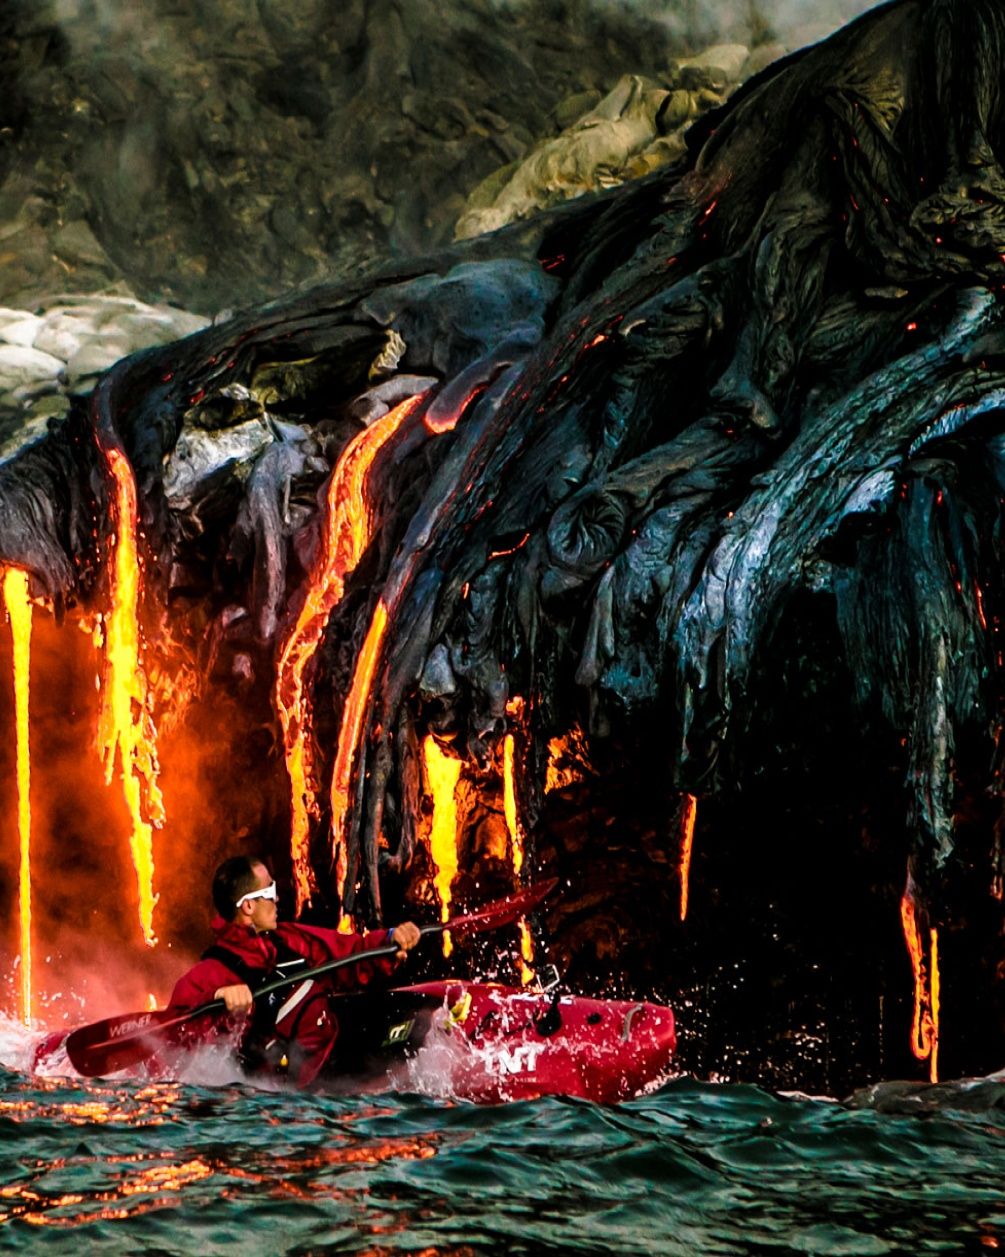 A close up image of Pedro Oliva kayaking in the water with hot lava in the background.